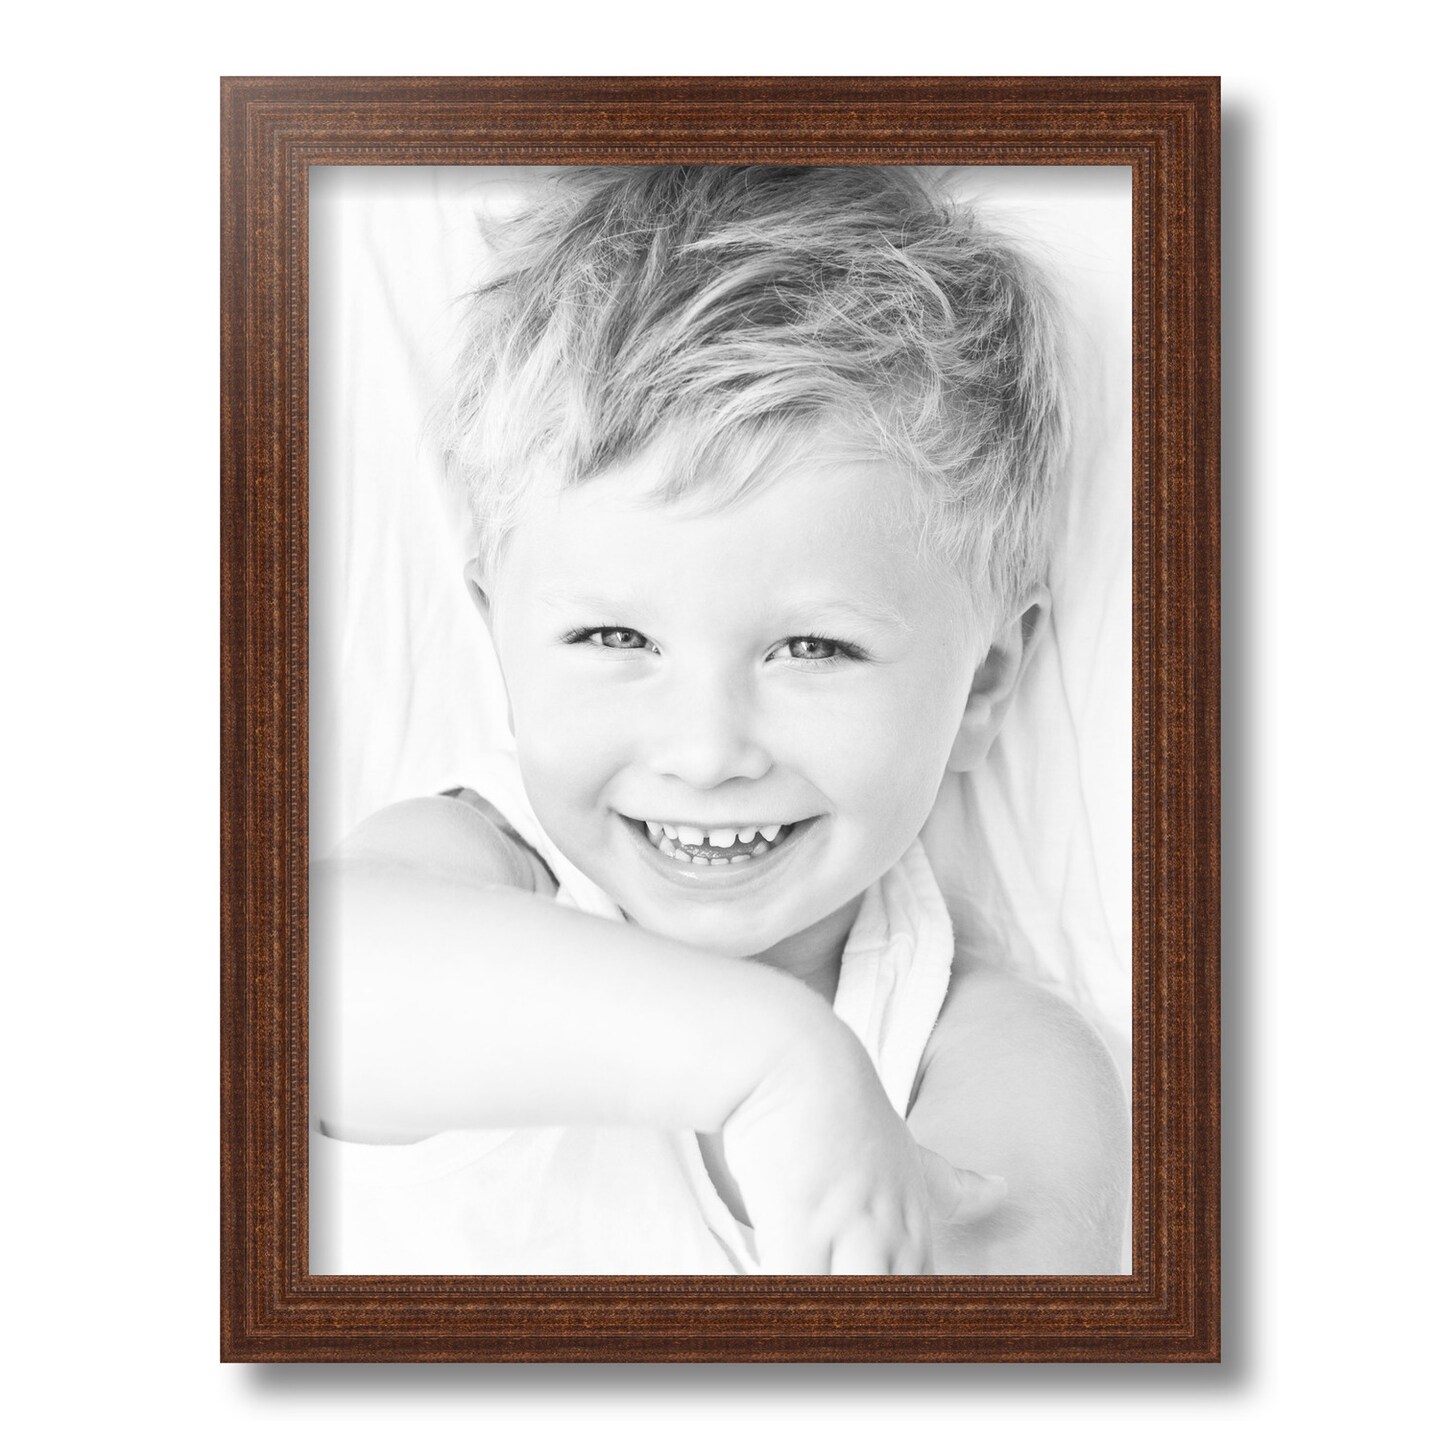 ArtToFrames 12x16 Inch Picture Frame, This 1.25 Inch Custom Wood Poster Frame is Available in Multiple Colors, Great for Your Art or Photos - Comes with Regular Glass and  Foam Backing 3/16 inch (V-81375-12x16)